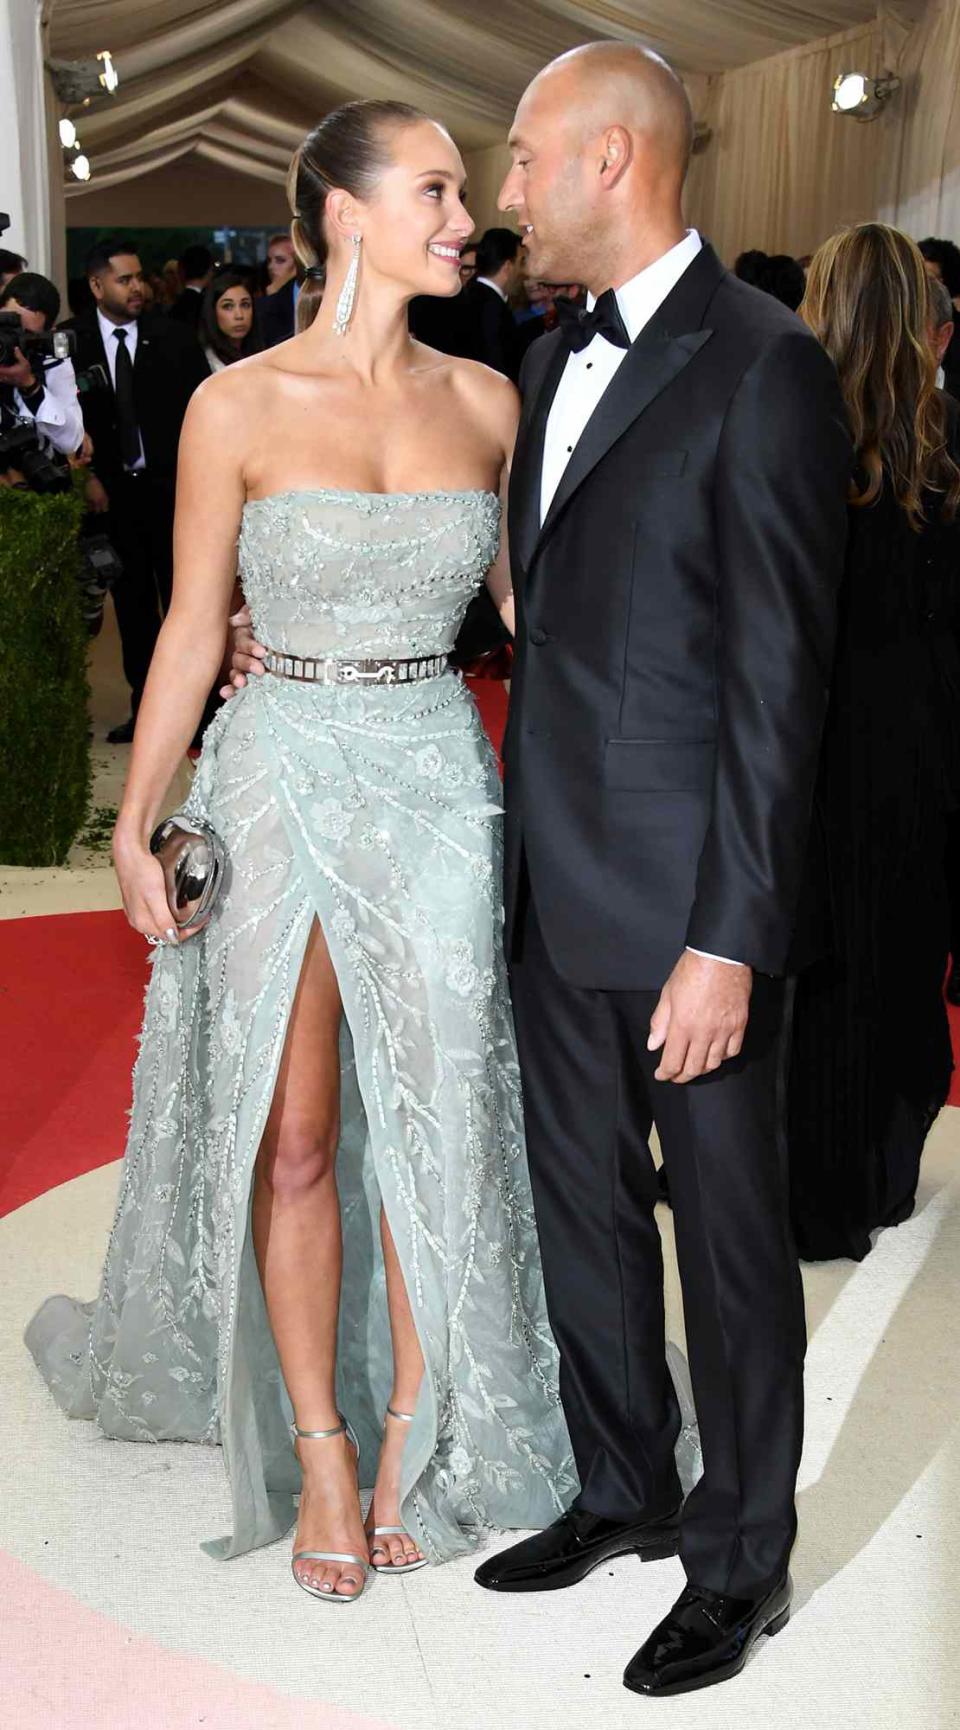 Hannah Davis (L) and Derek Jeter attend the "Manus x Machina: Fashion In An Age Of Technology" Costume Institute Gala at Metropolitan Museum of Art on May 2, 2016 in New York City